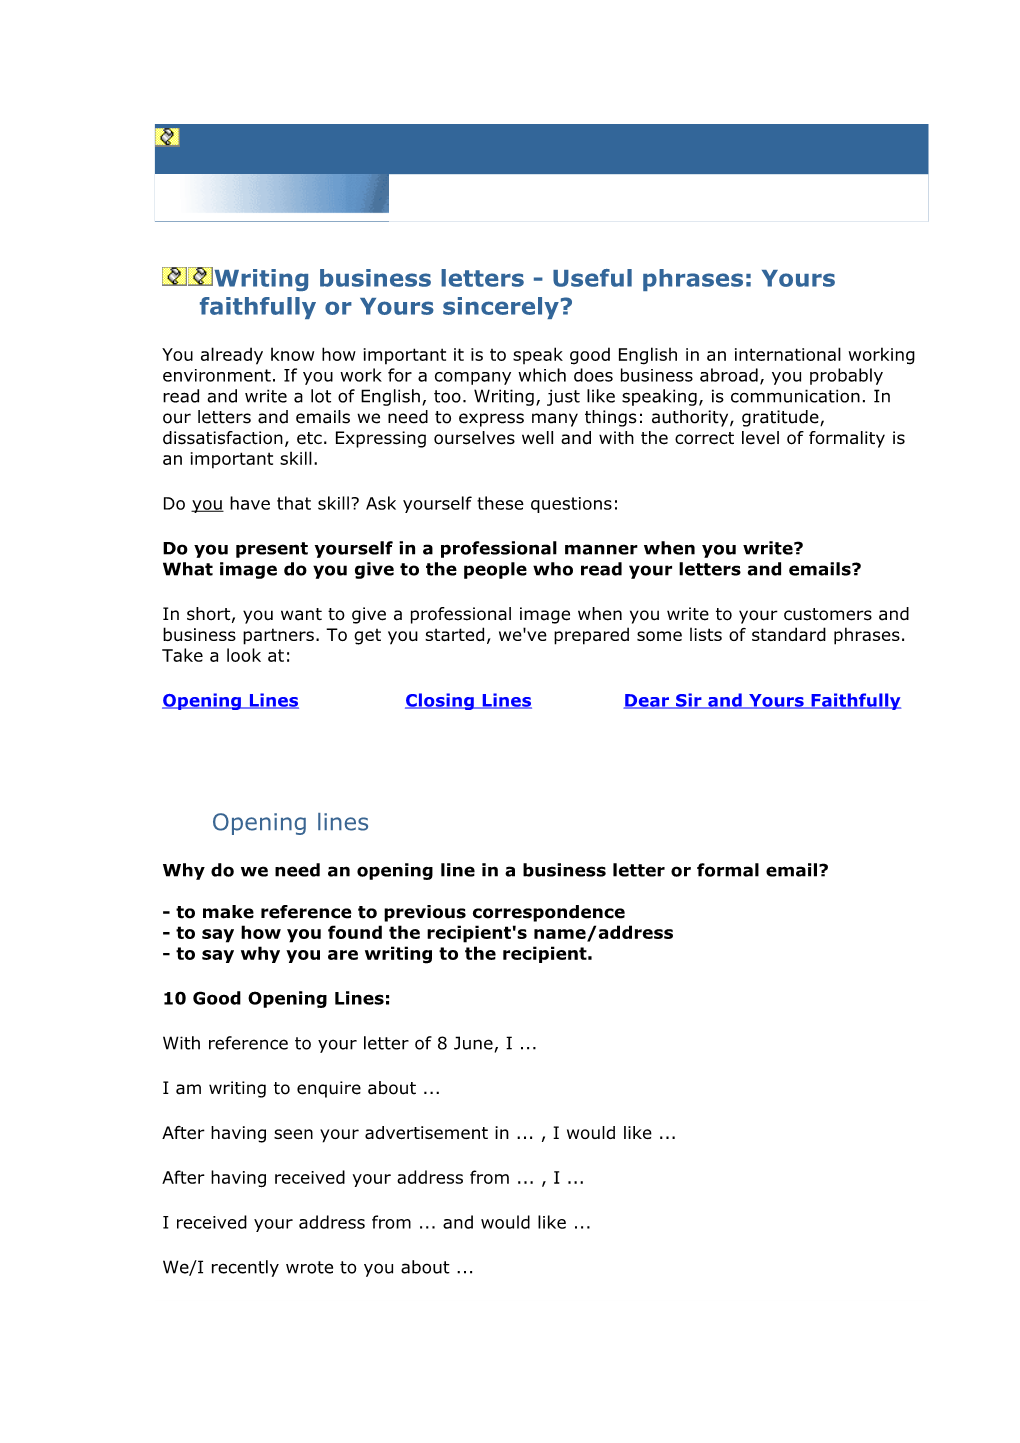 Writing Business Letters - Useful Phrases: Yours Faithfully Or Yours Sincerely?